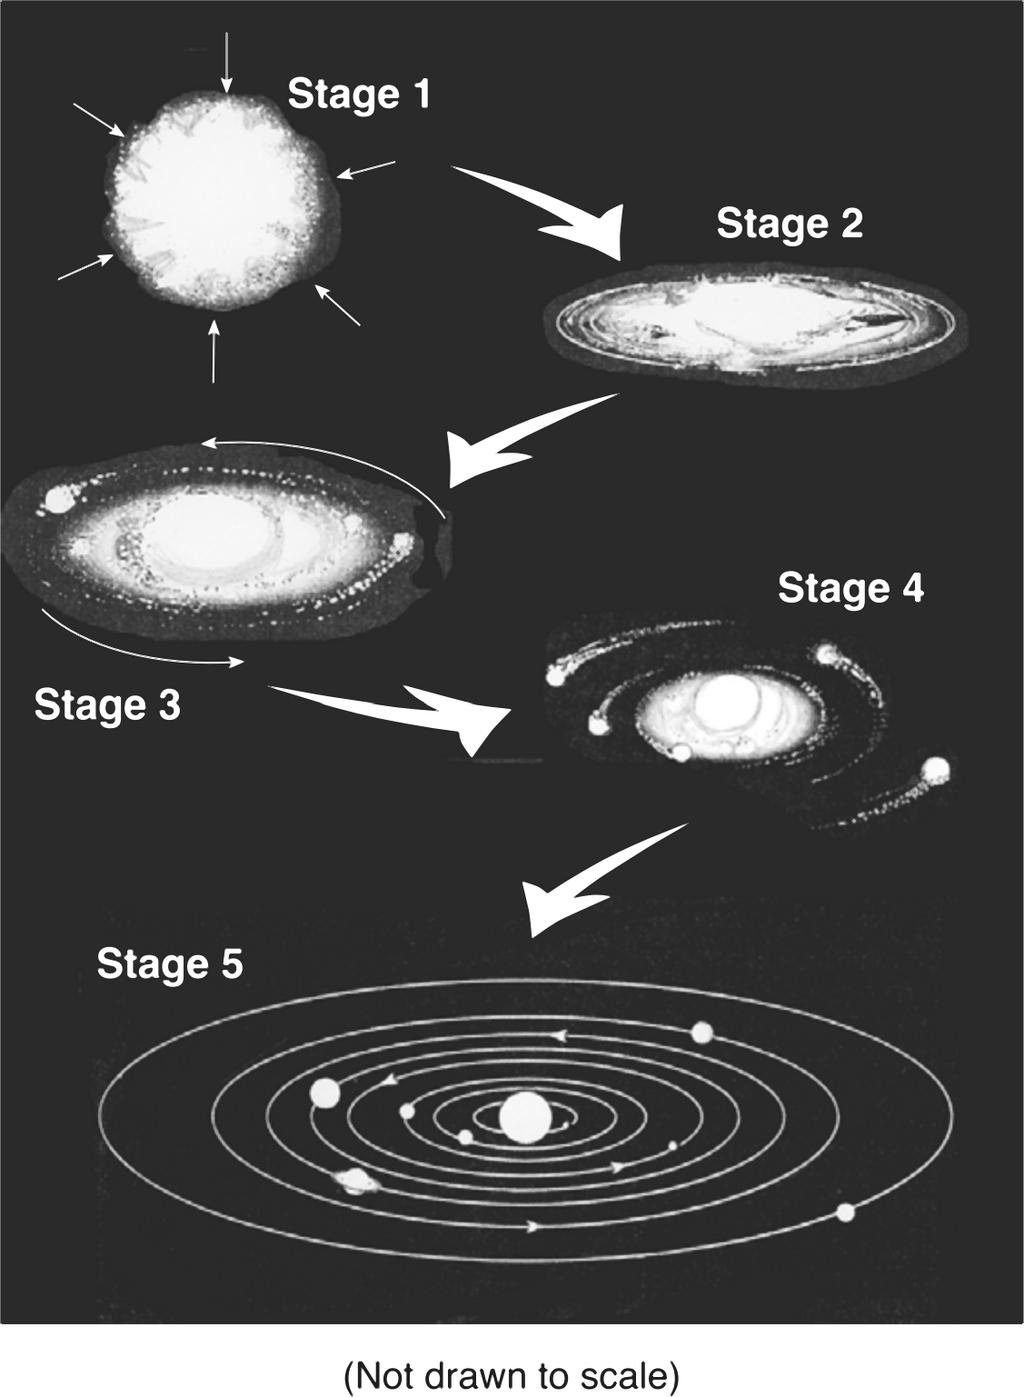 Base your answer(s) to the following question(s) on the diagram below. The diagram represents the inferred stages in the formation of our solar system. Stage 1 shows a contracting gas cloud.